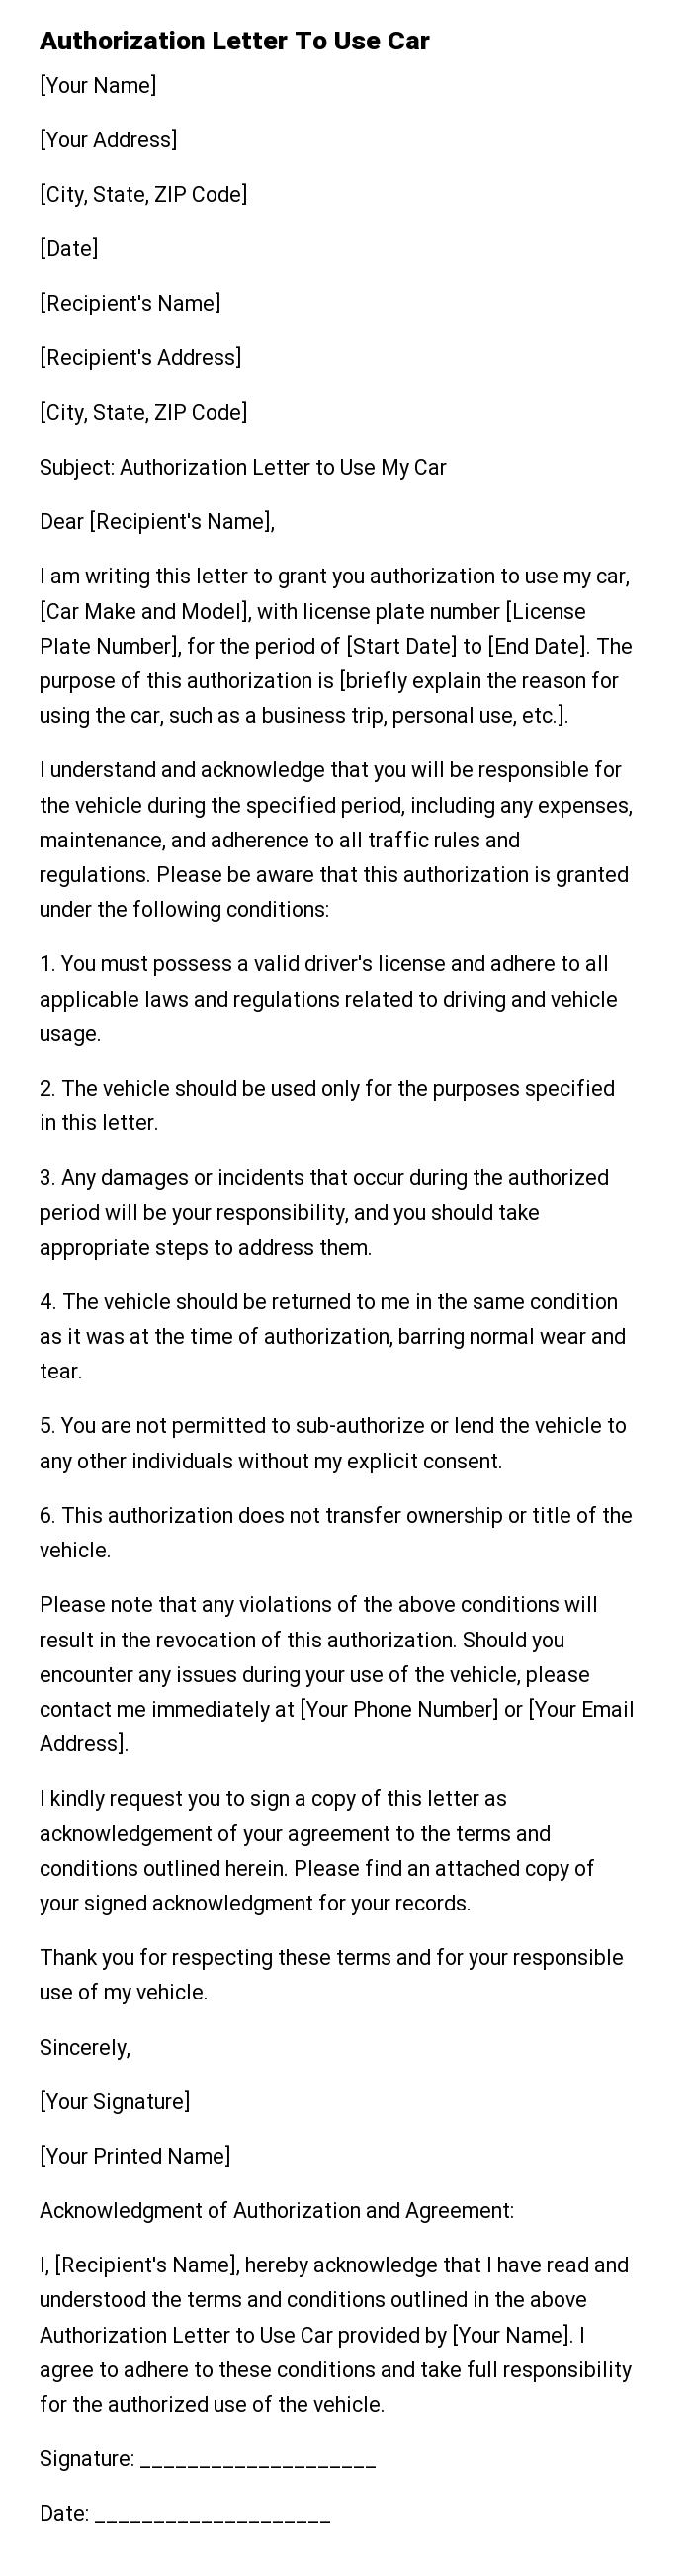 Authorization Letter To Use Car